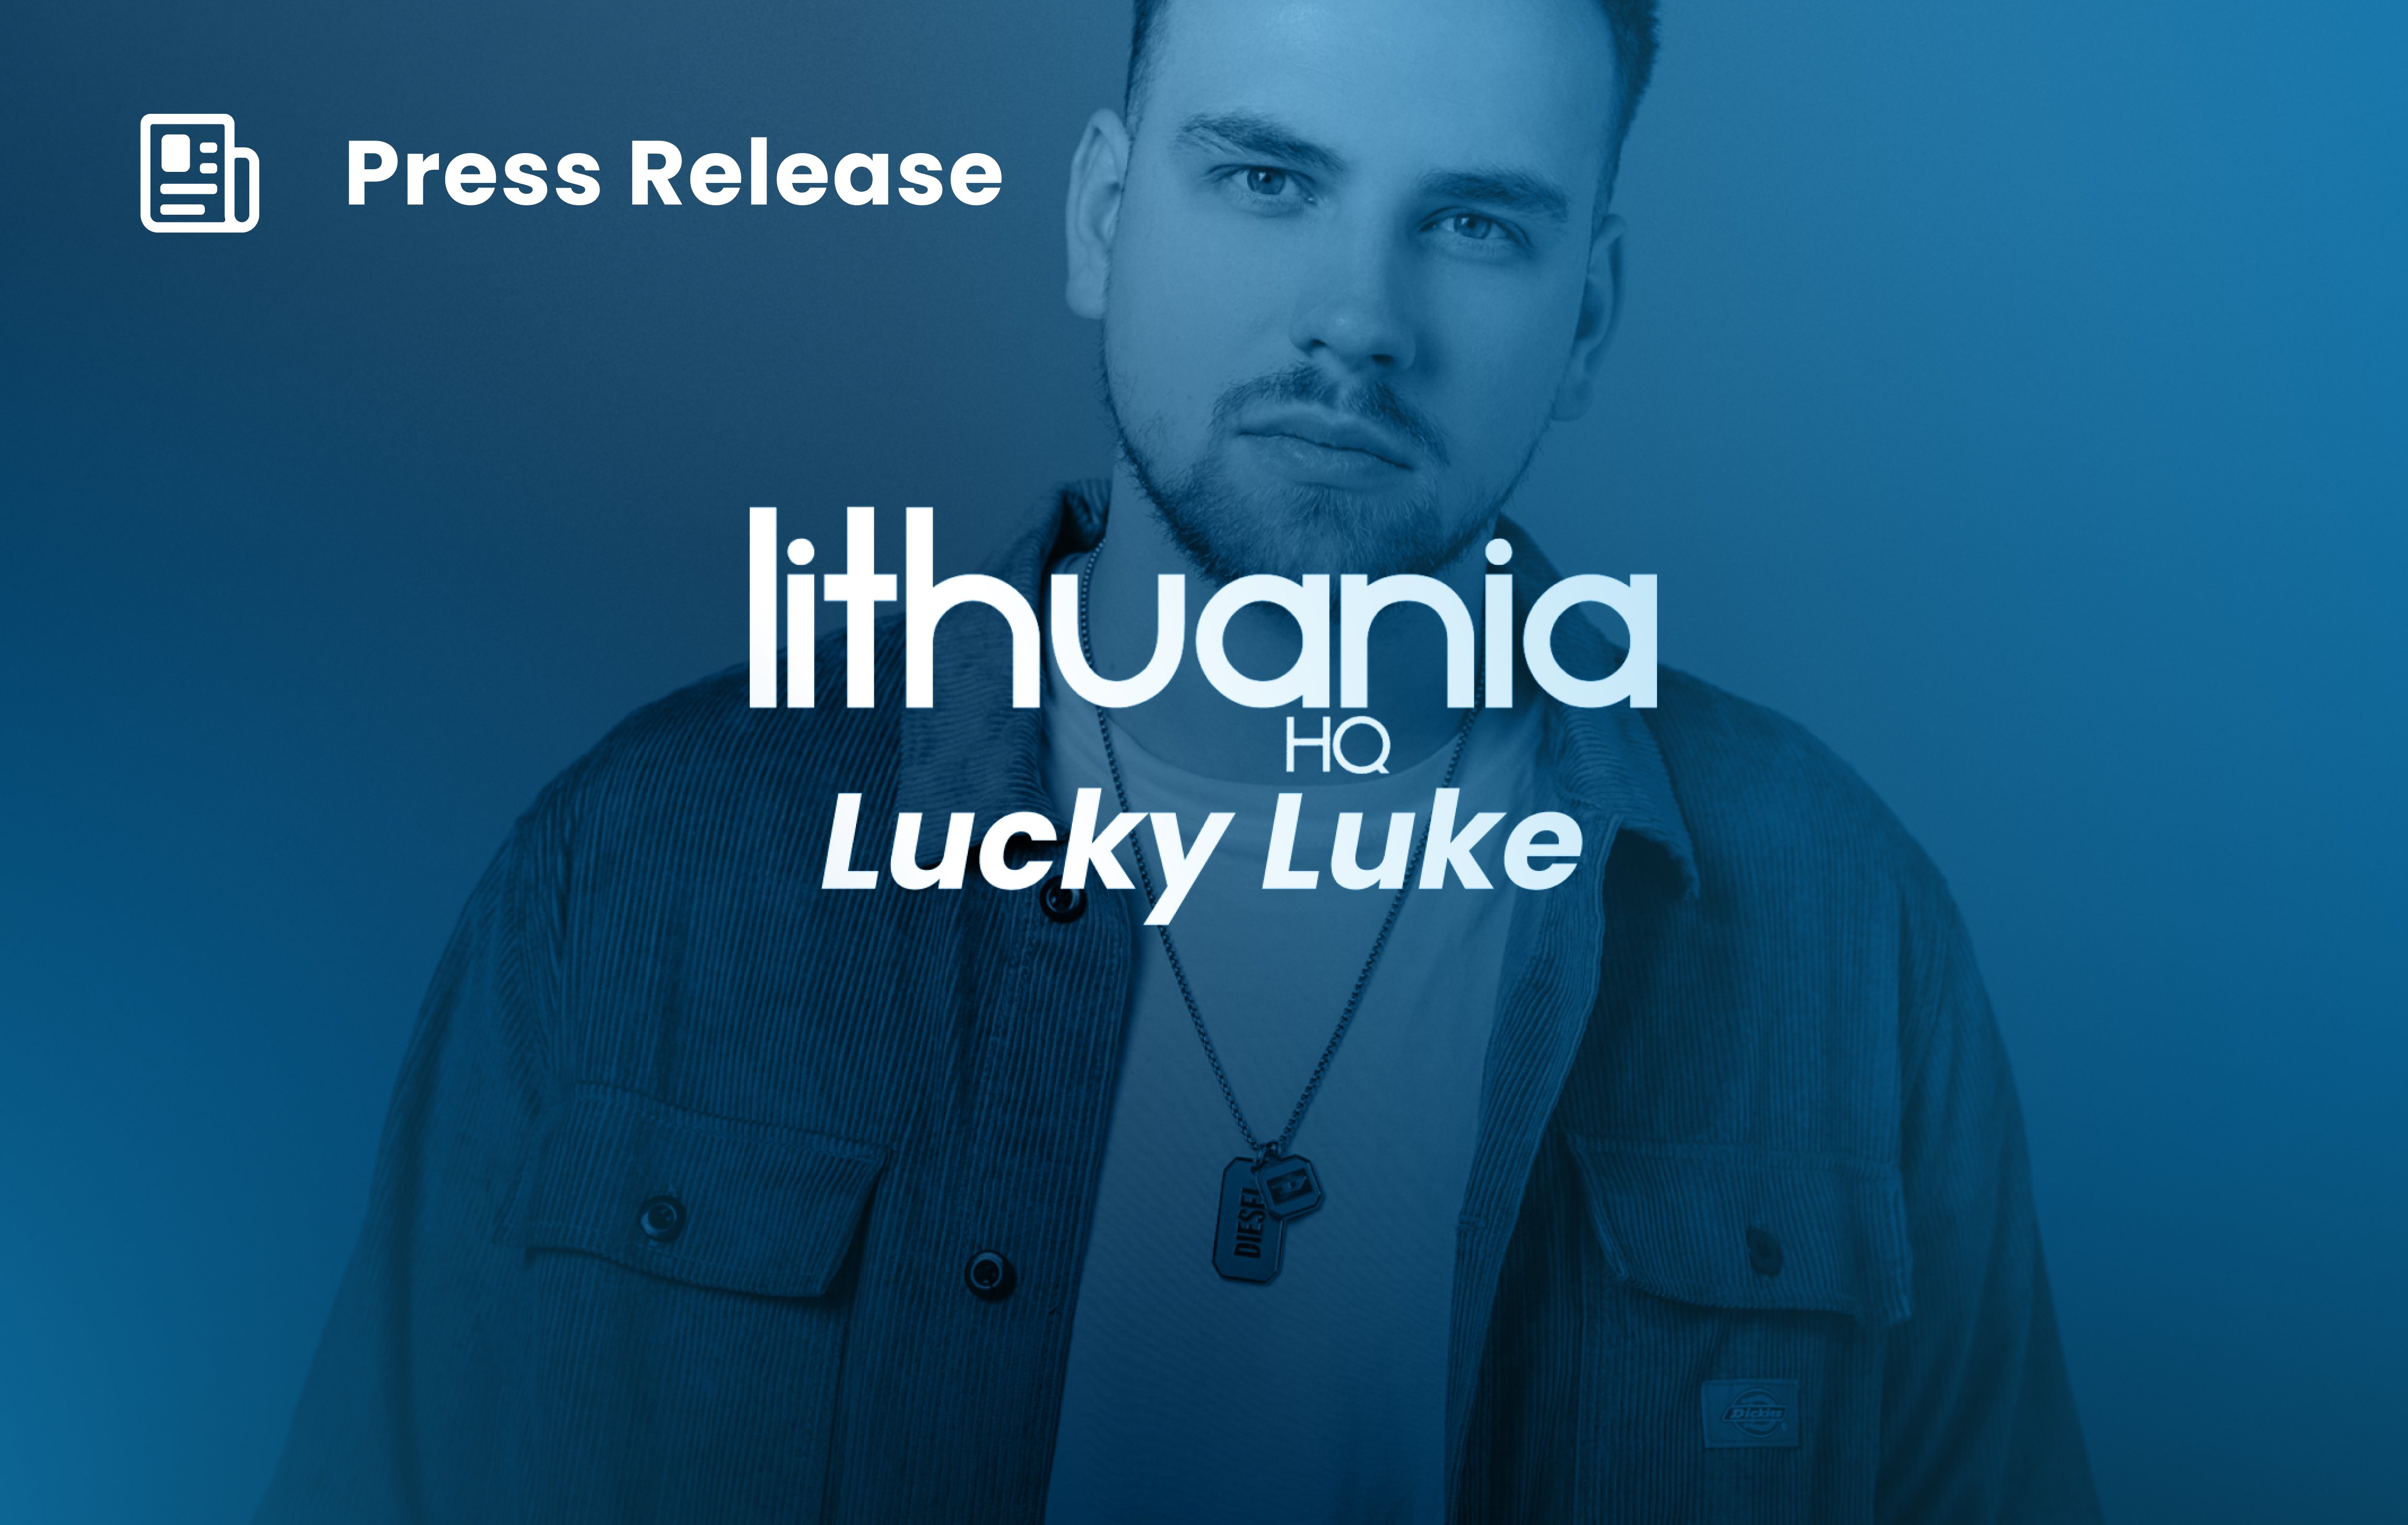 Latest step of Lithuania HQ partnership sees Lucky Luke catalogue listing on ANote platform